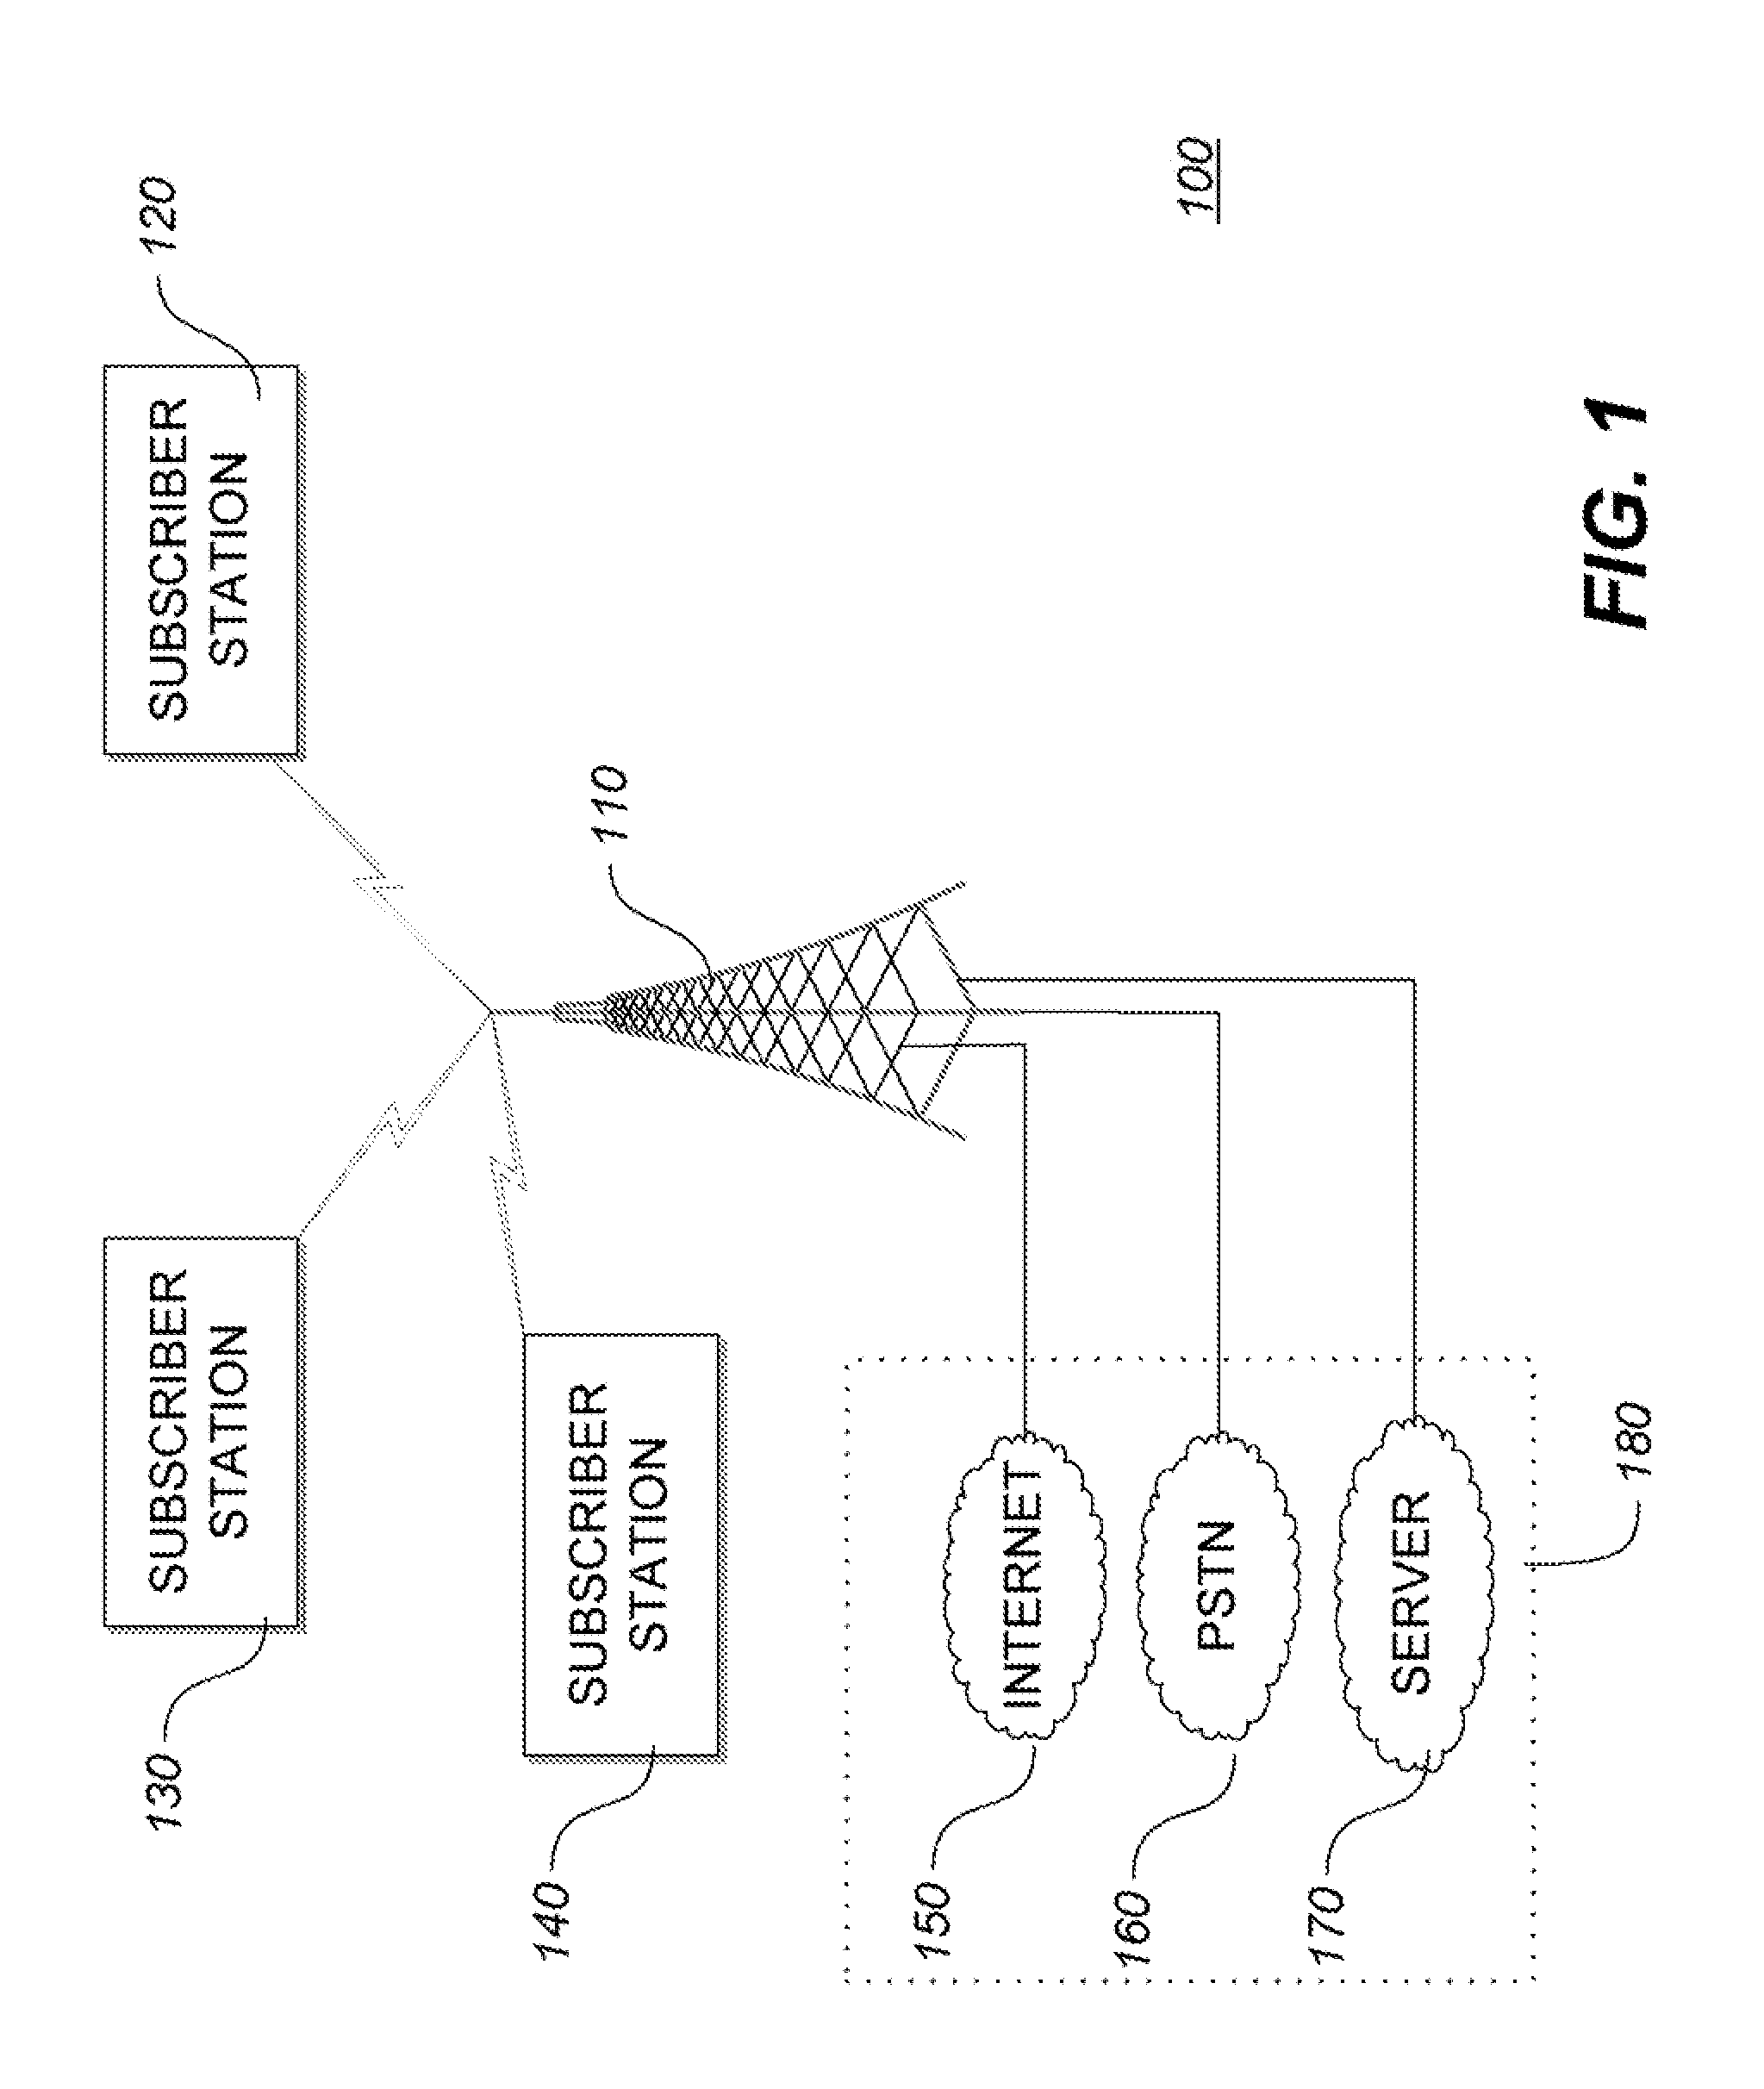 Latency-aware adaptive bandwidth request mechanism for real-time communication in WiMAX